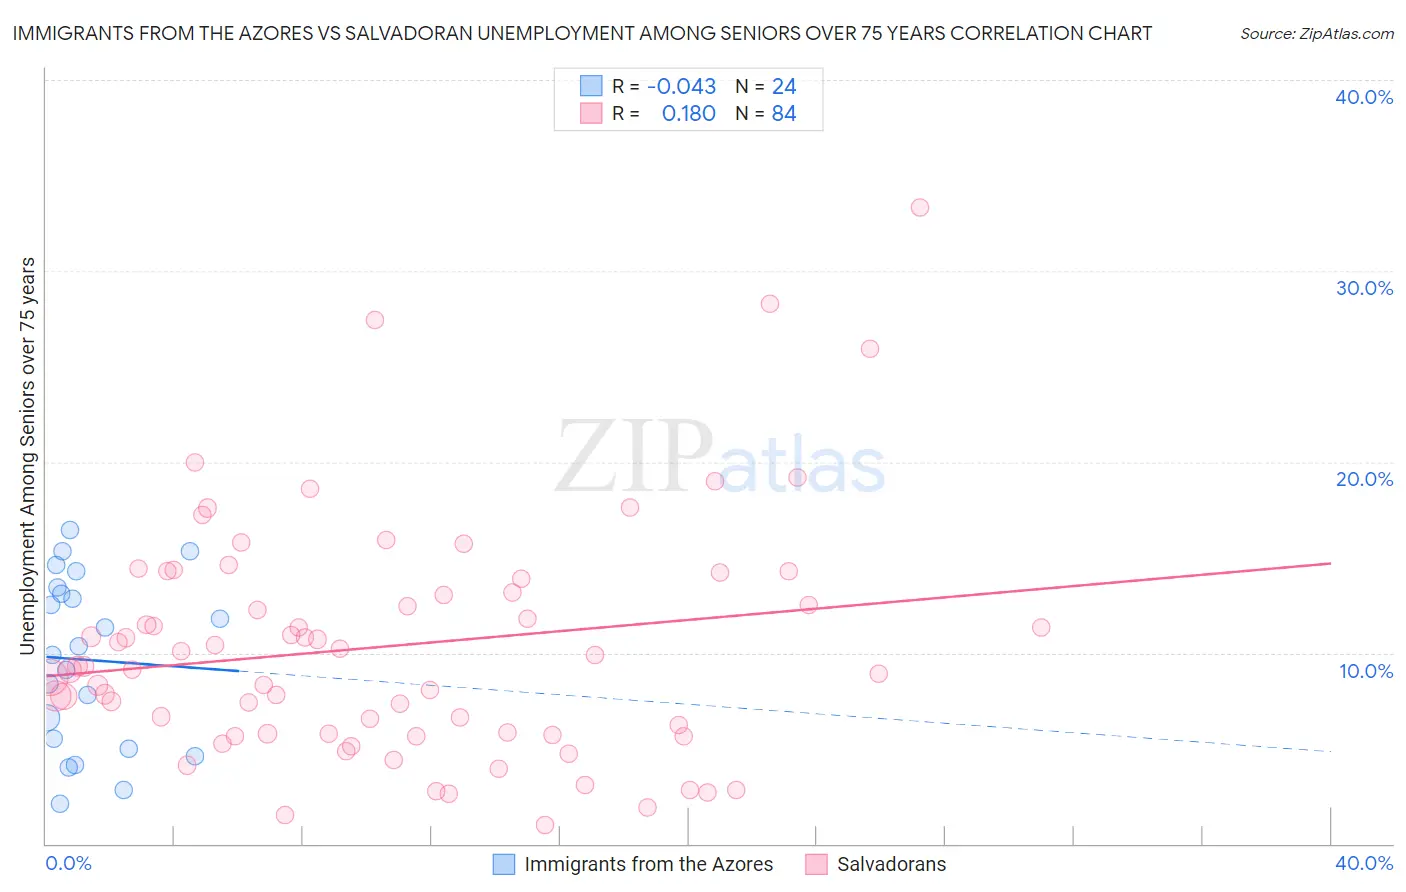 Immigrants from the Azores vs Salvadoran Unemployment Among Seniors over 75 years